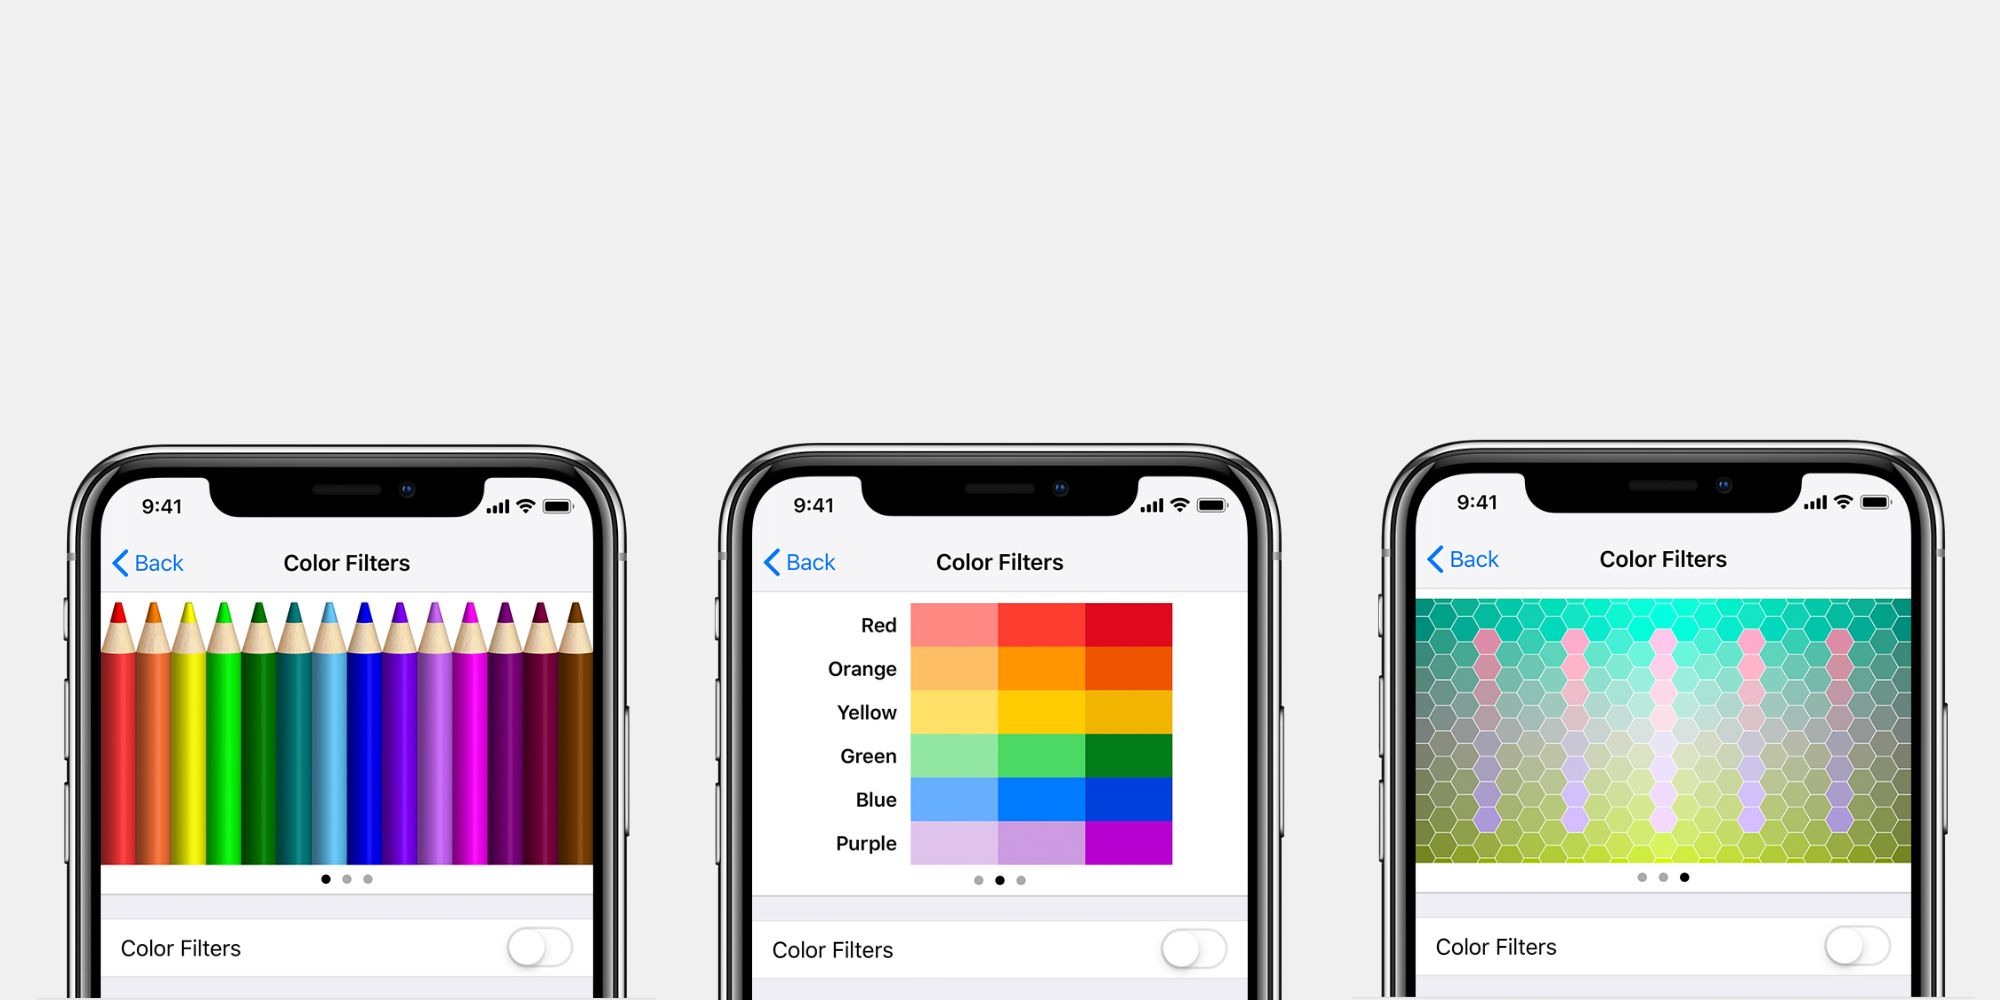 Apple iPhone Color Filter options